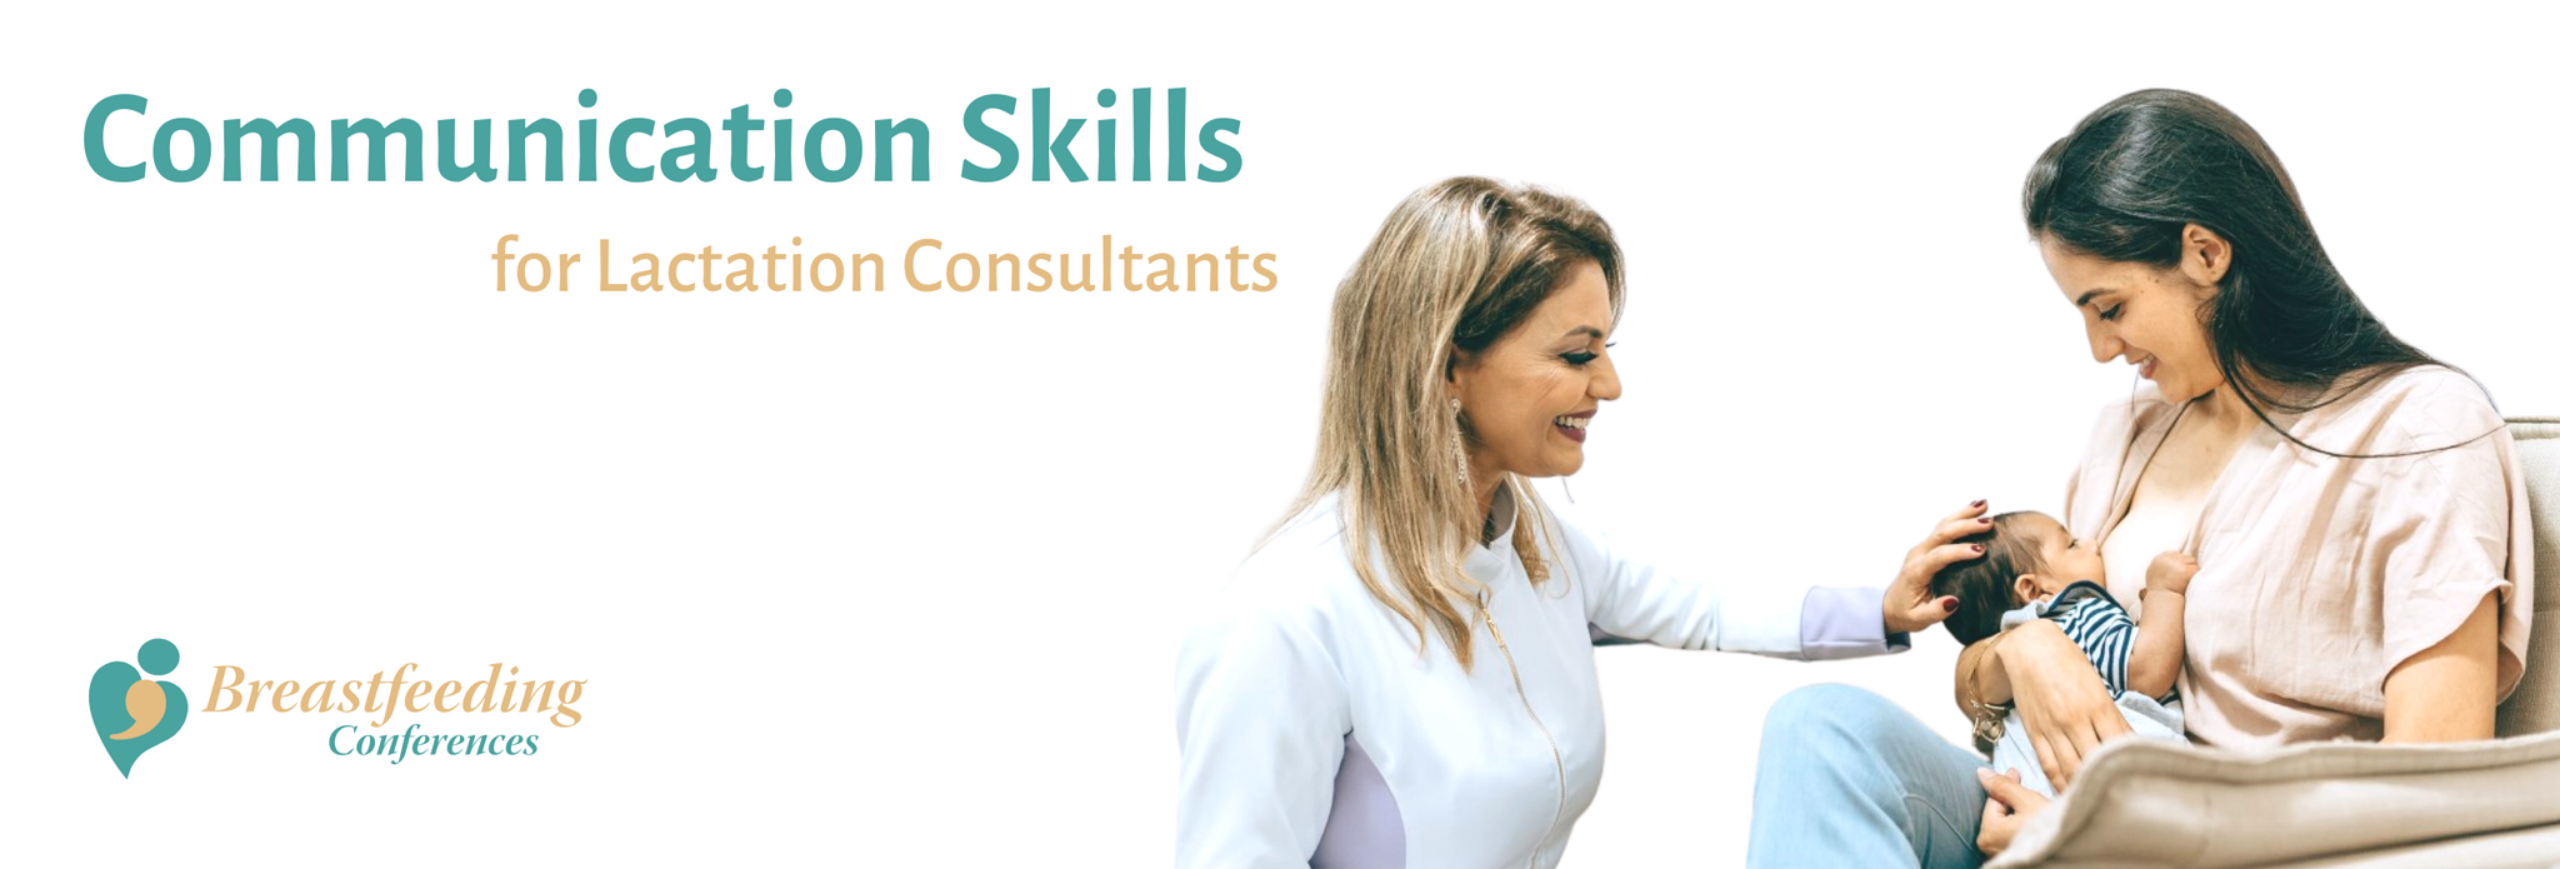 Communication skills for lactation consultants